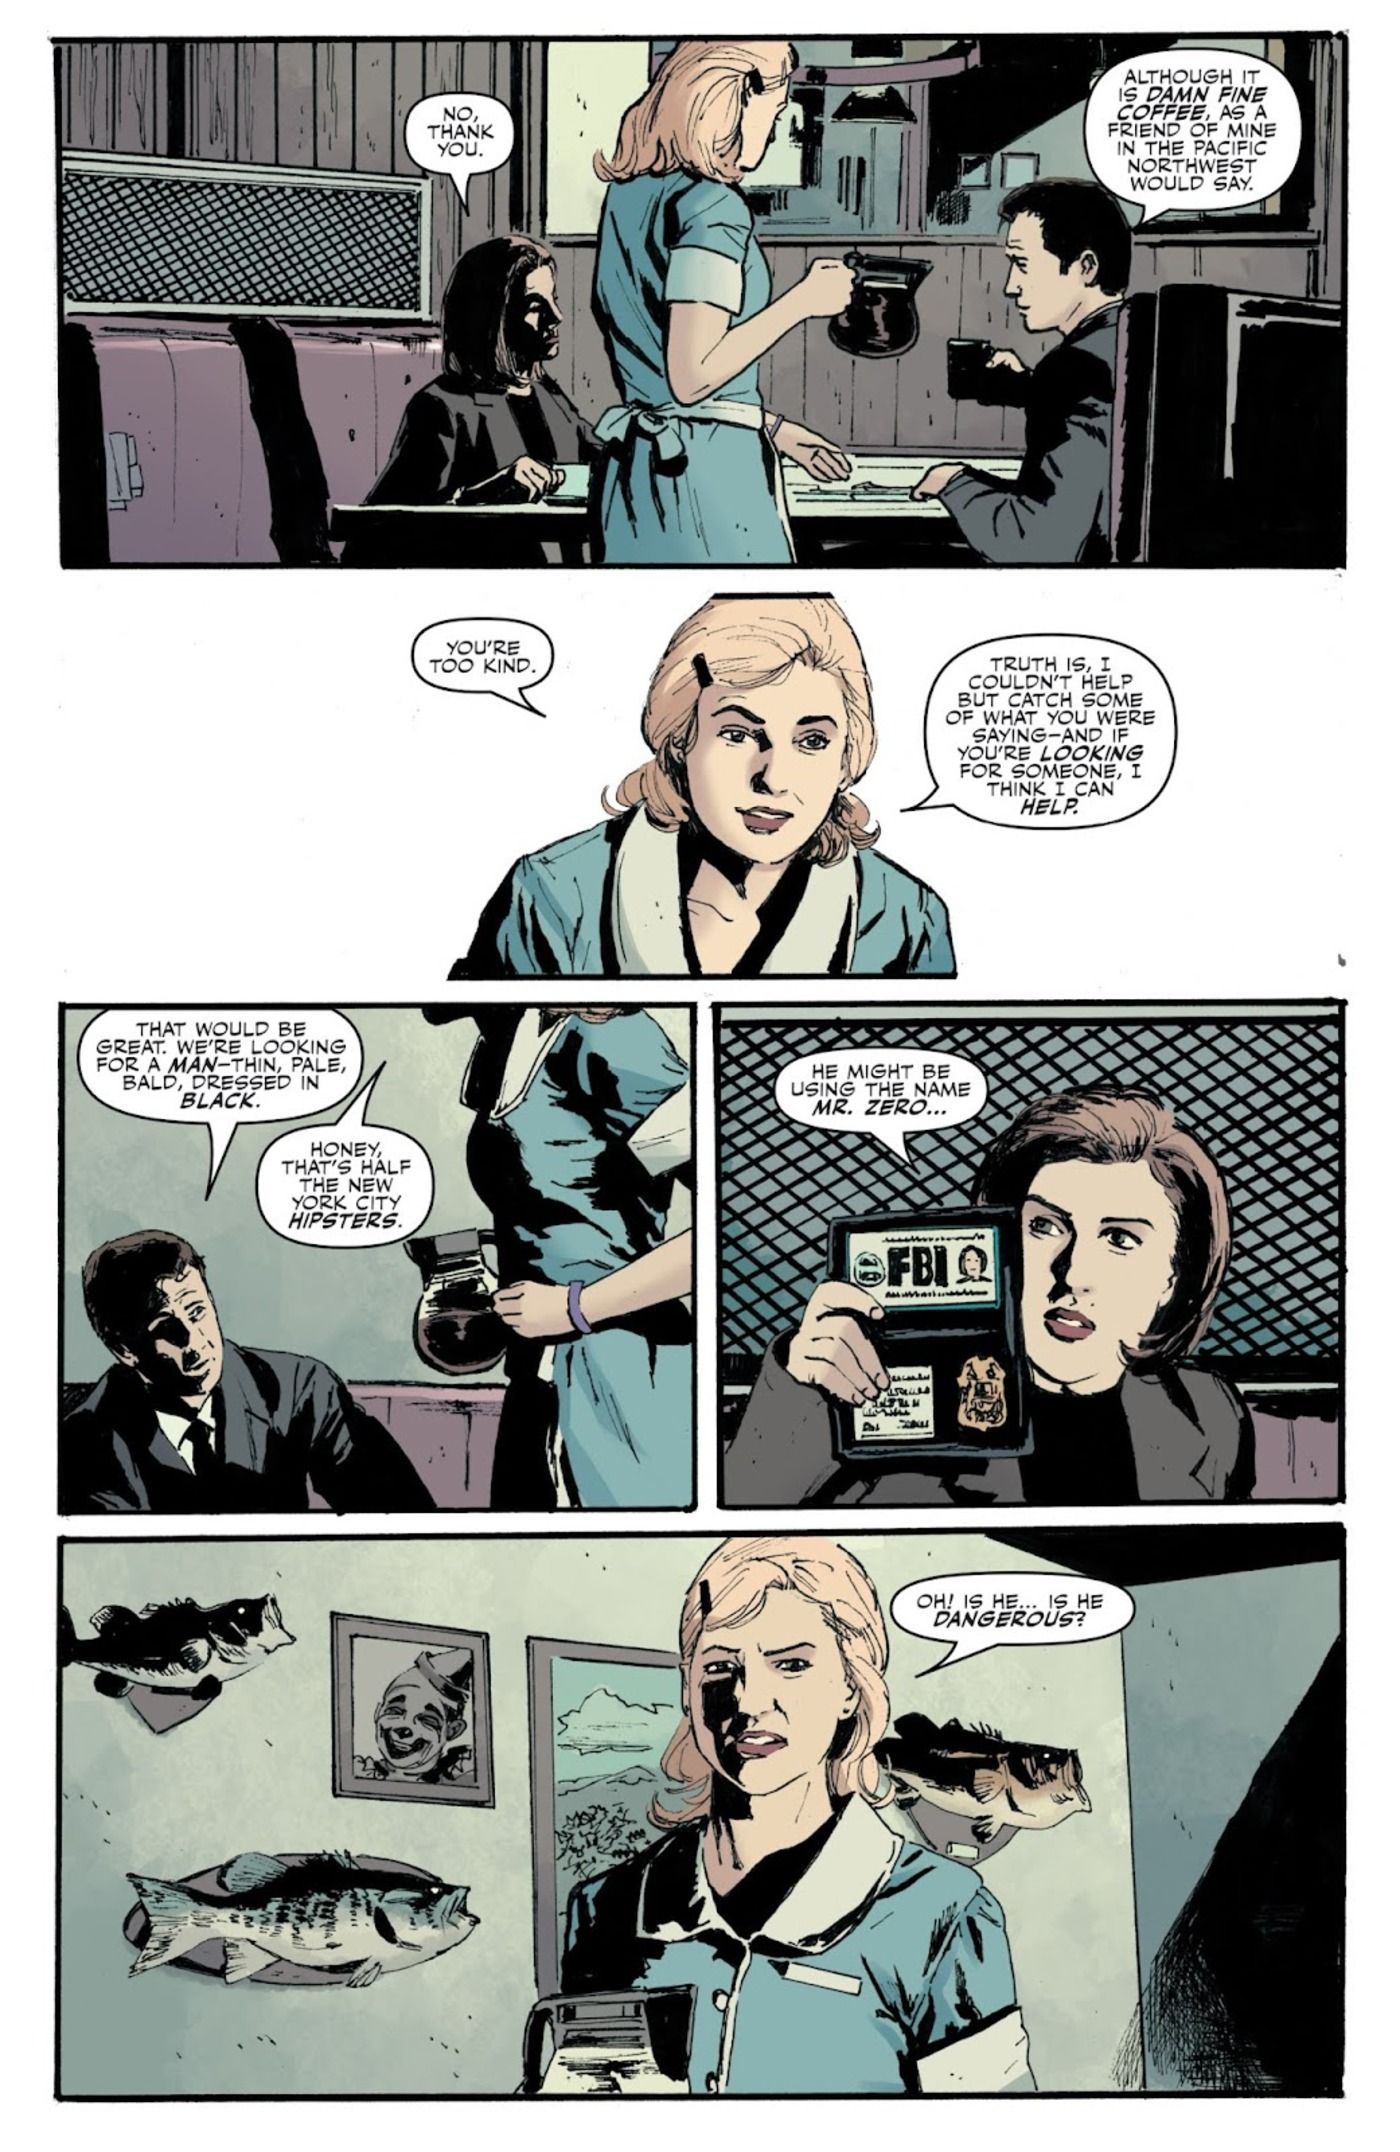 page from The X-Files: Year Zero, where Mulder references Dale Cooper from Twin Peaks